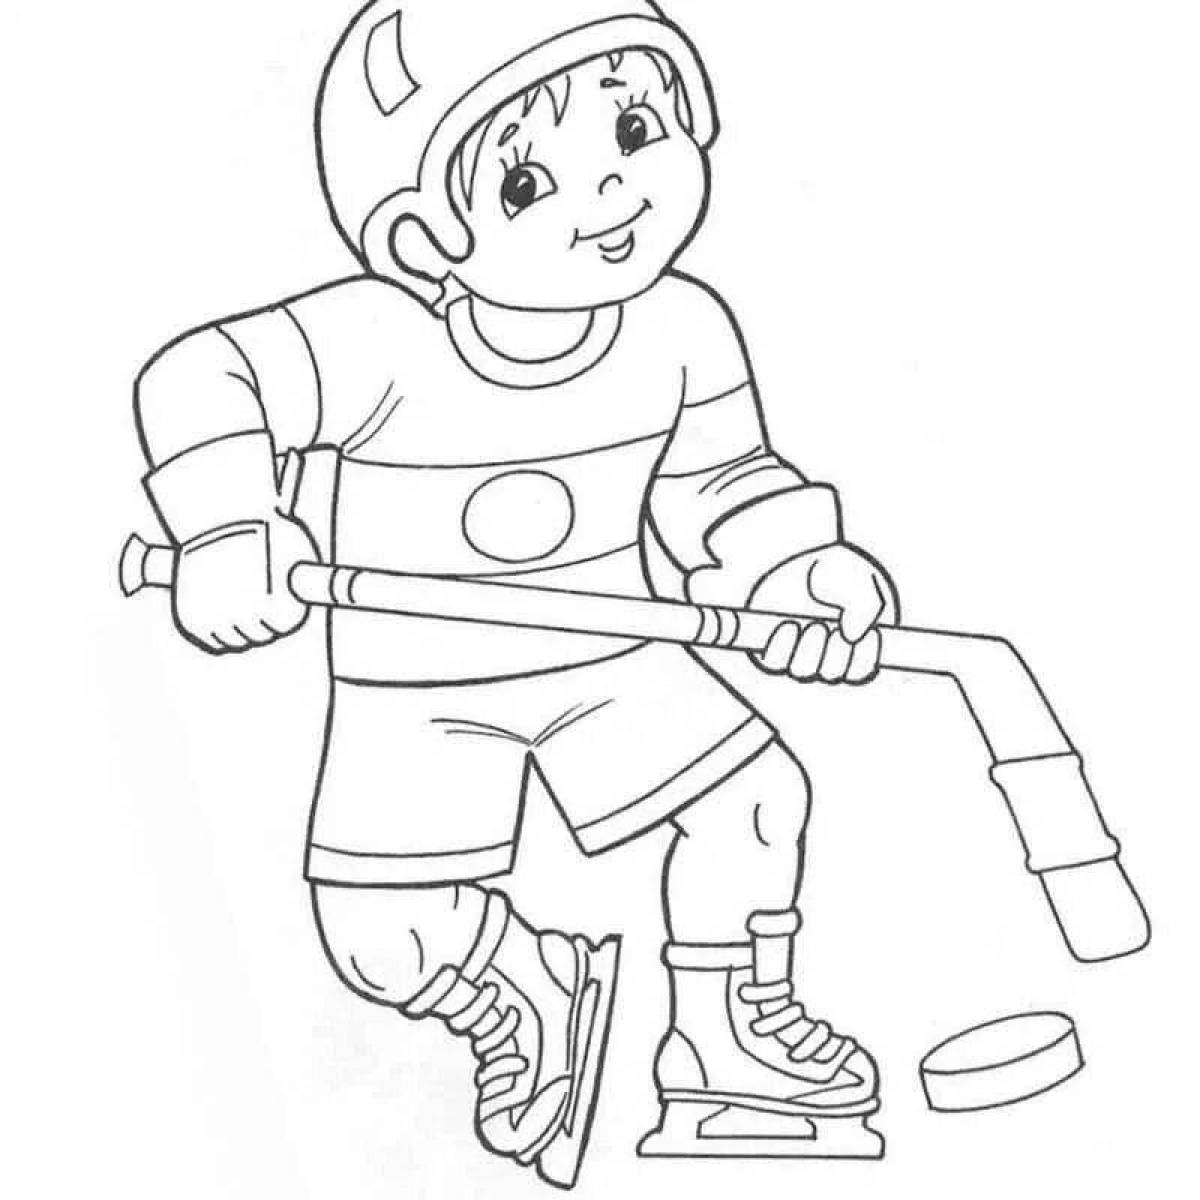 Great sports coloring book for kids